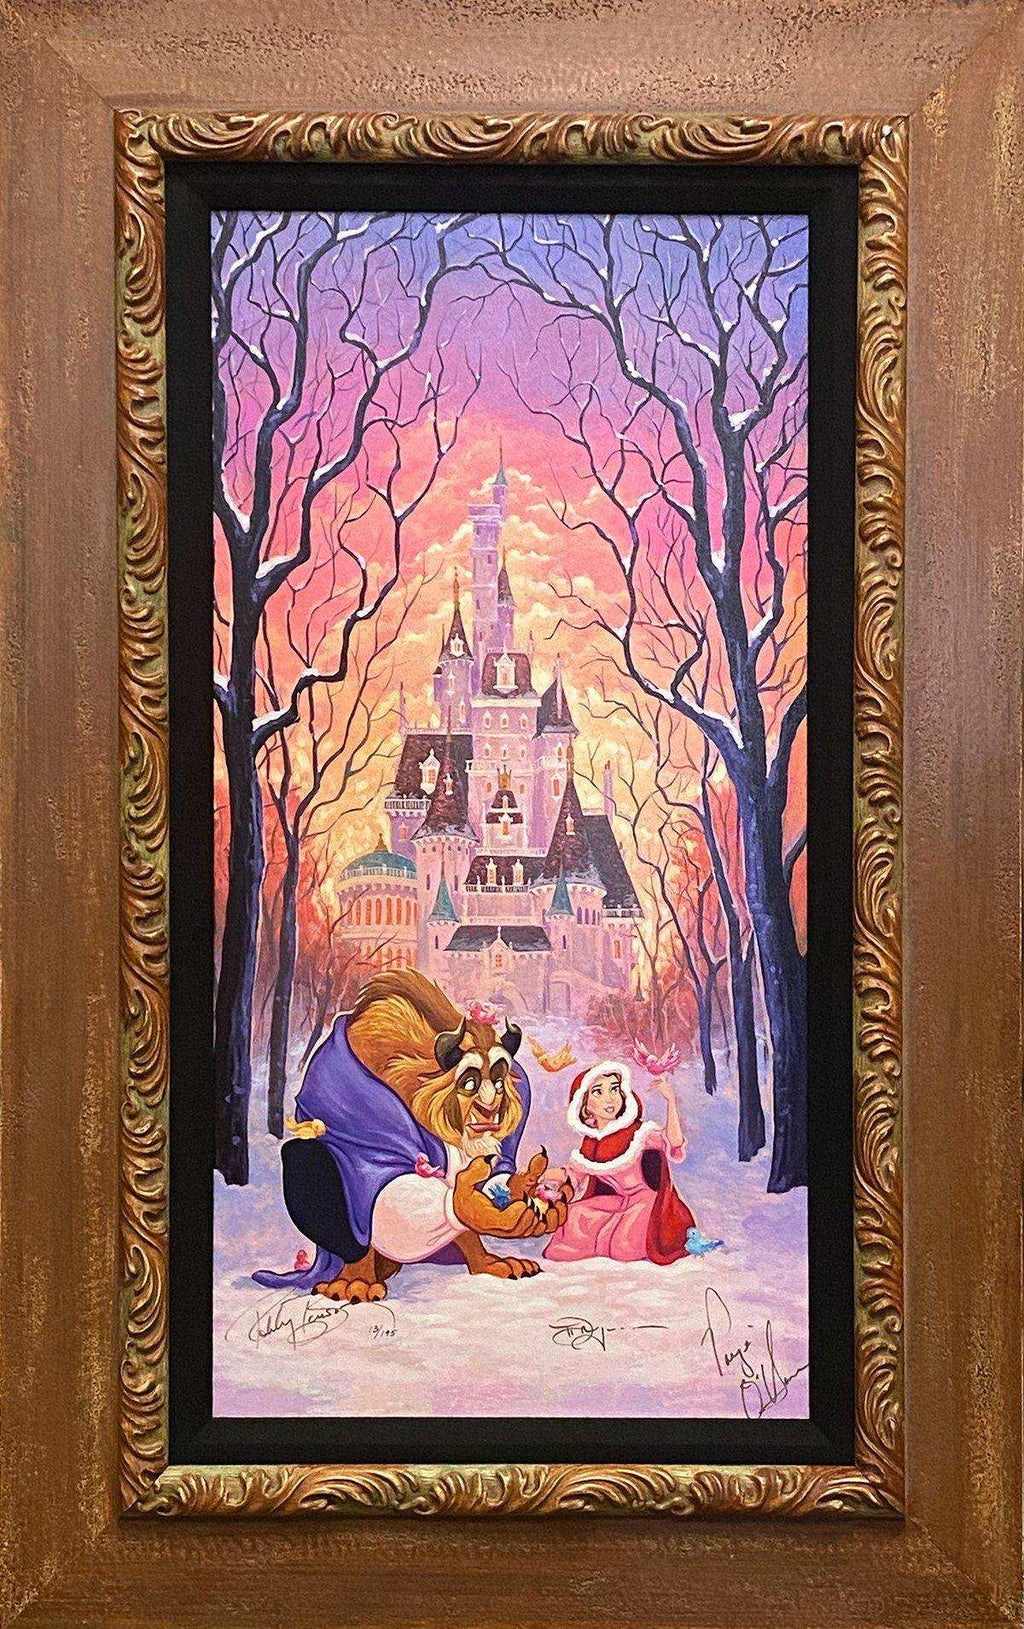 Triple Signed Disney Limited Edition: There's Something Sweet - Choice Fine Art